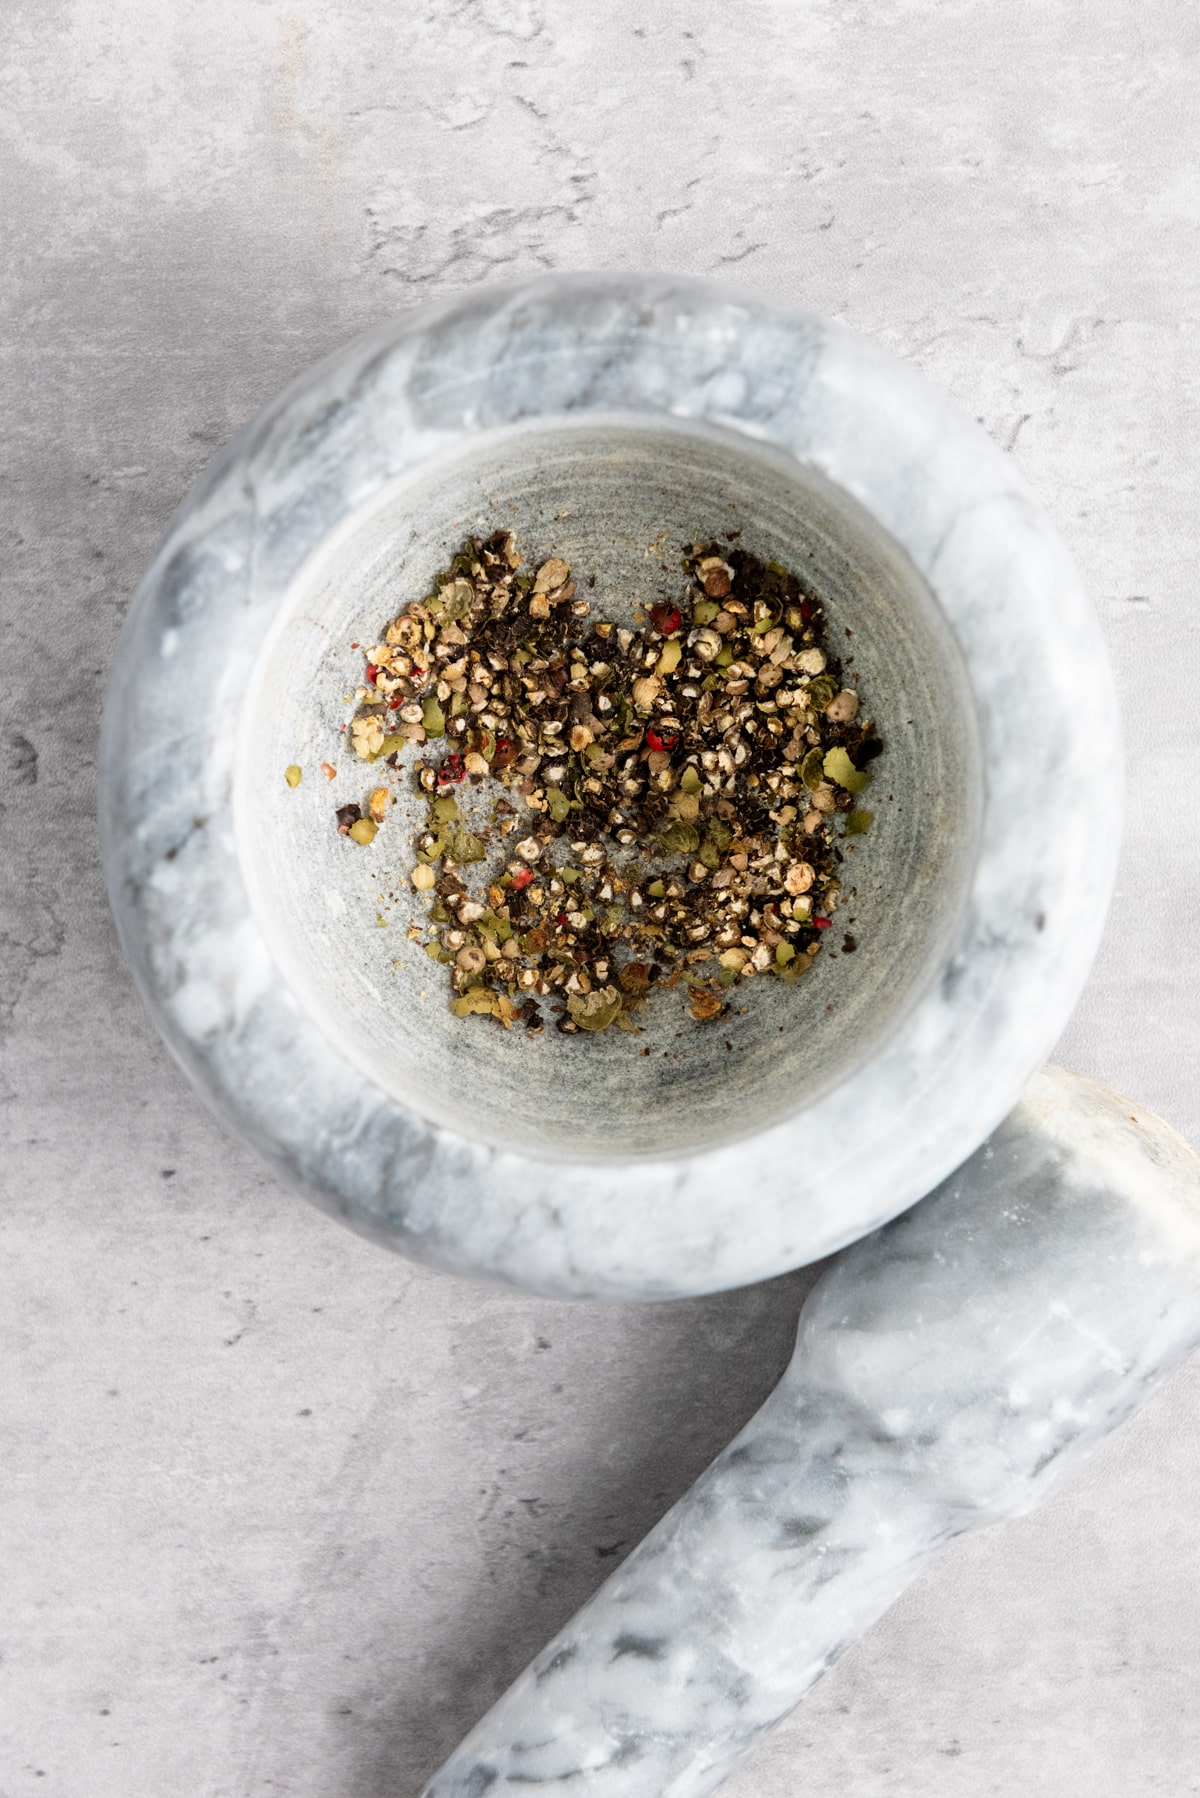 Crushed whole peppercorns inside a gray ceramic mortar bowl with a ceramic pestle on the side on top of a gray surface.